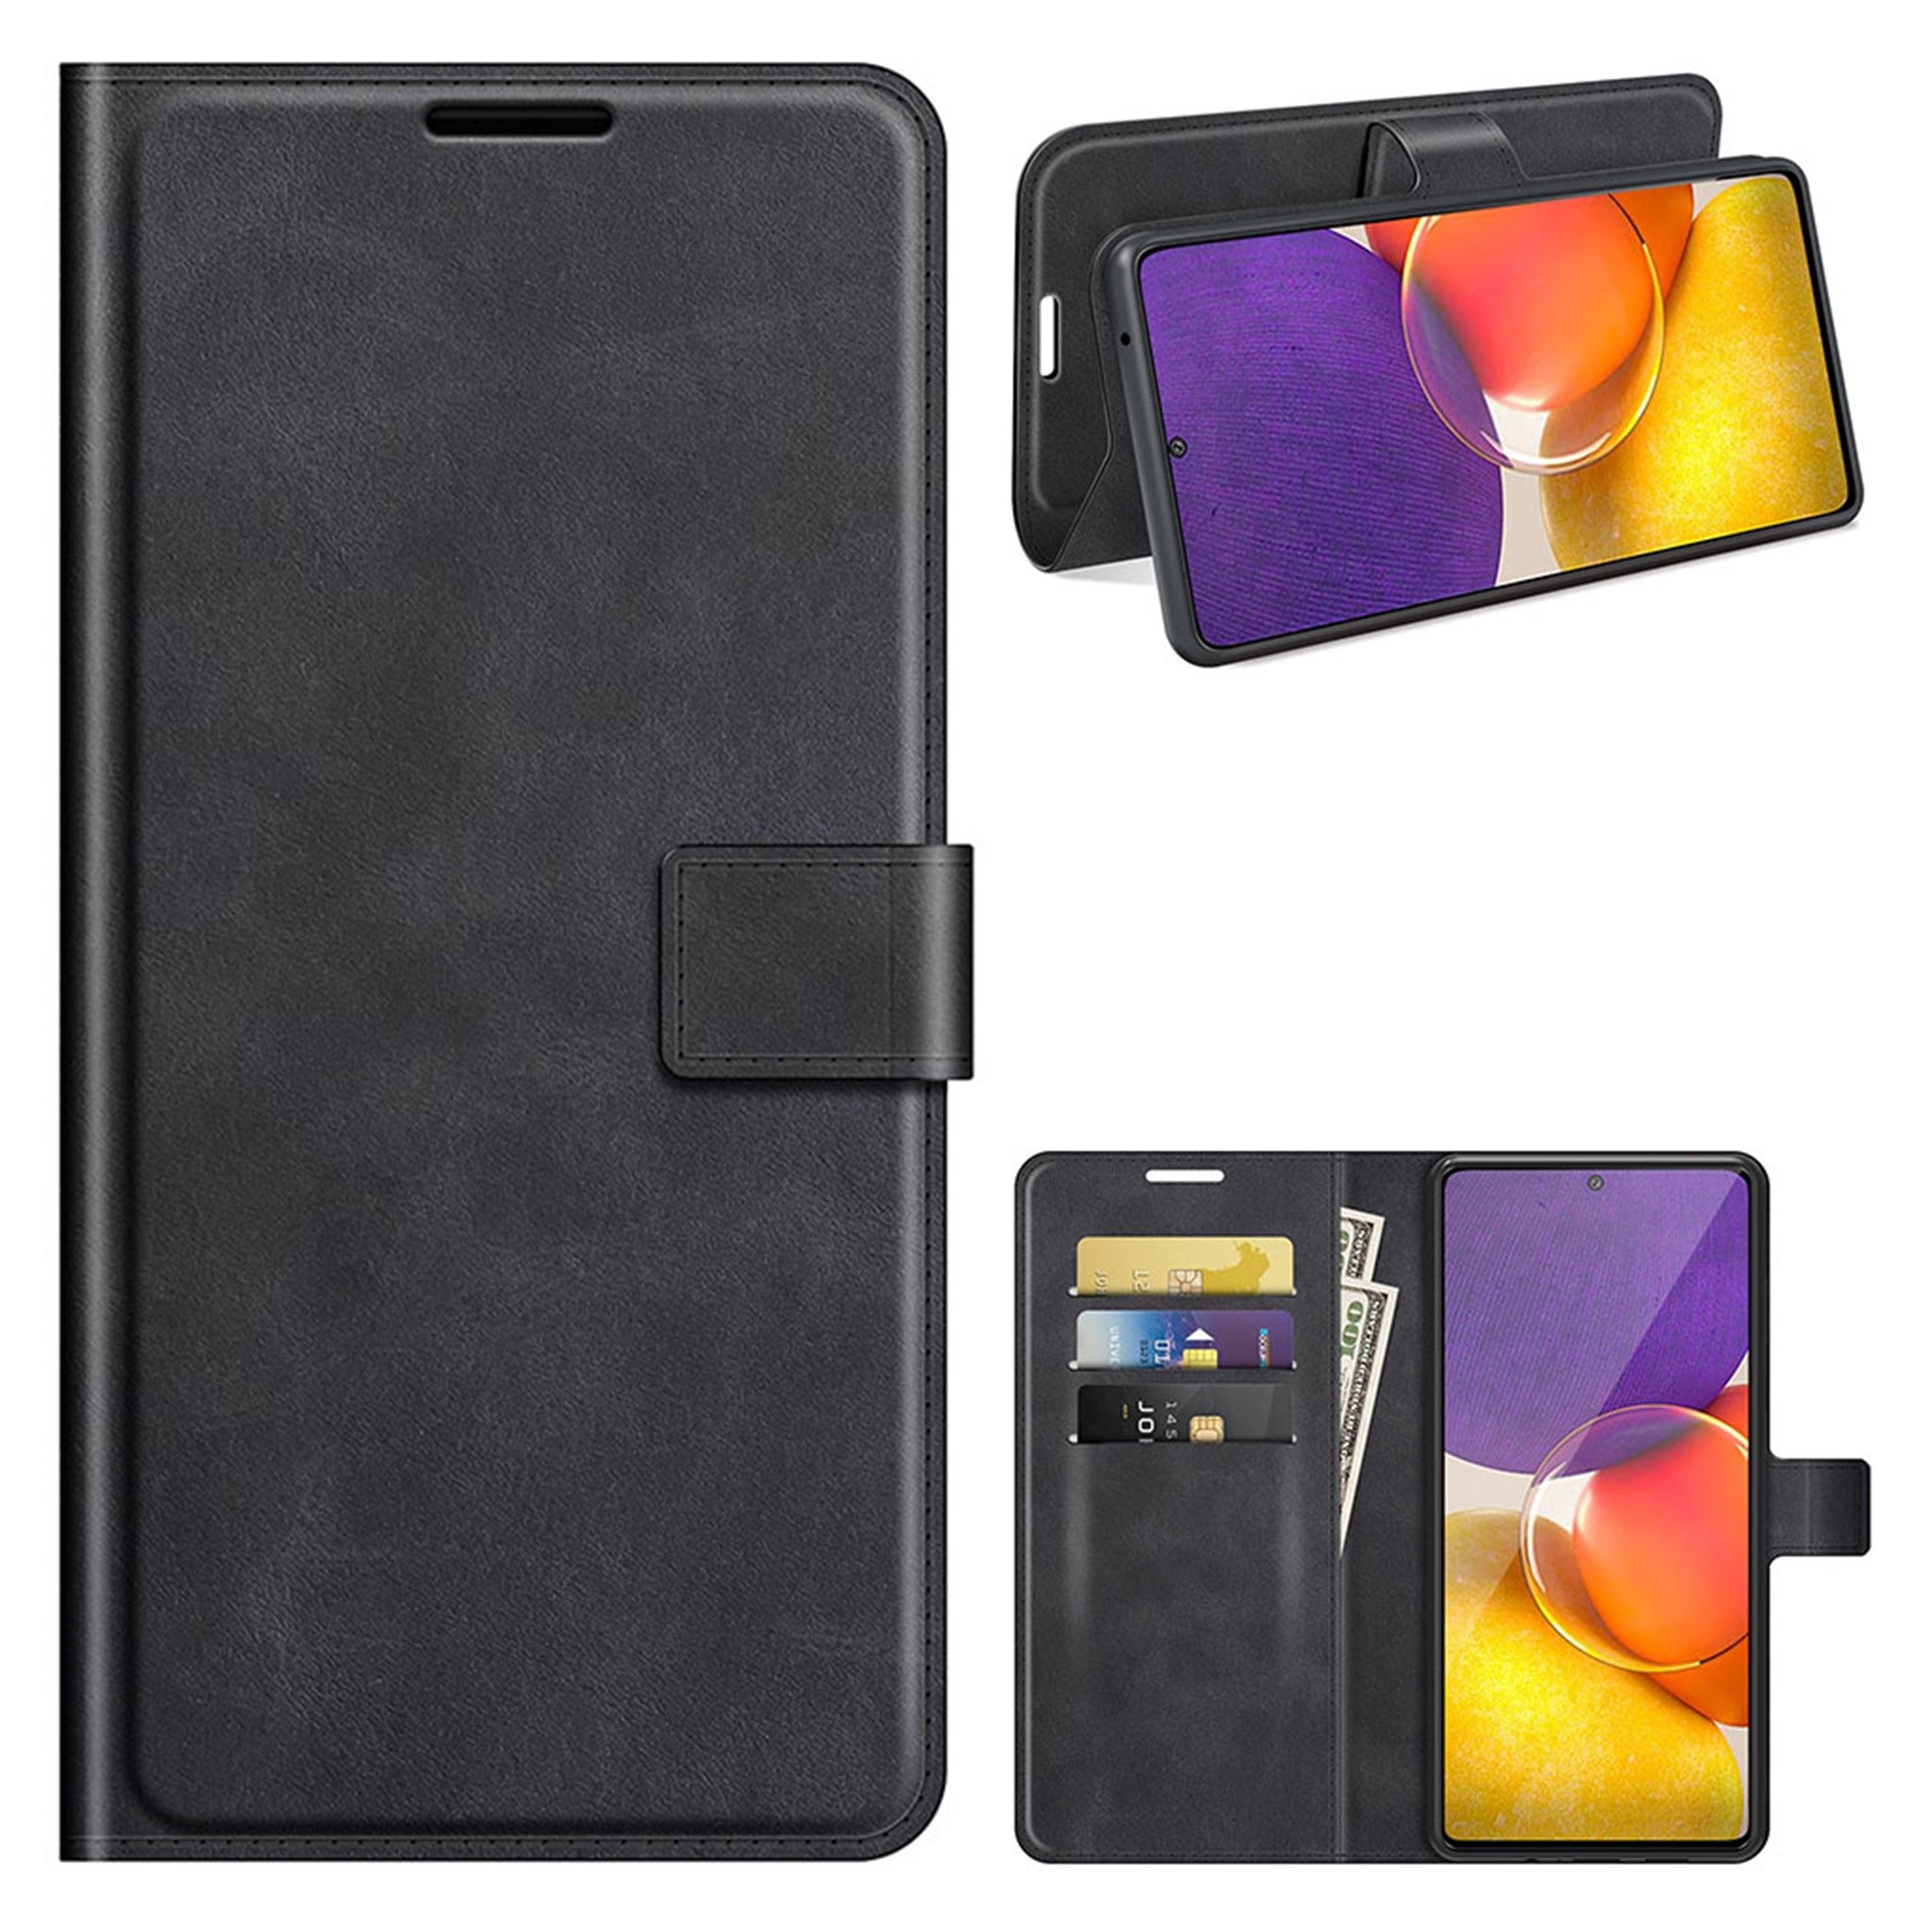 Wallet-style leather case for Samsung Galaxy Quantum 2 - Black